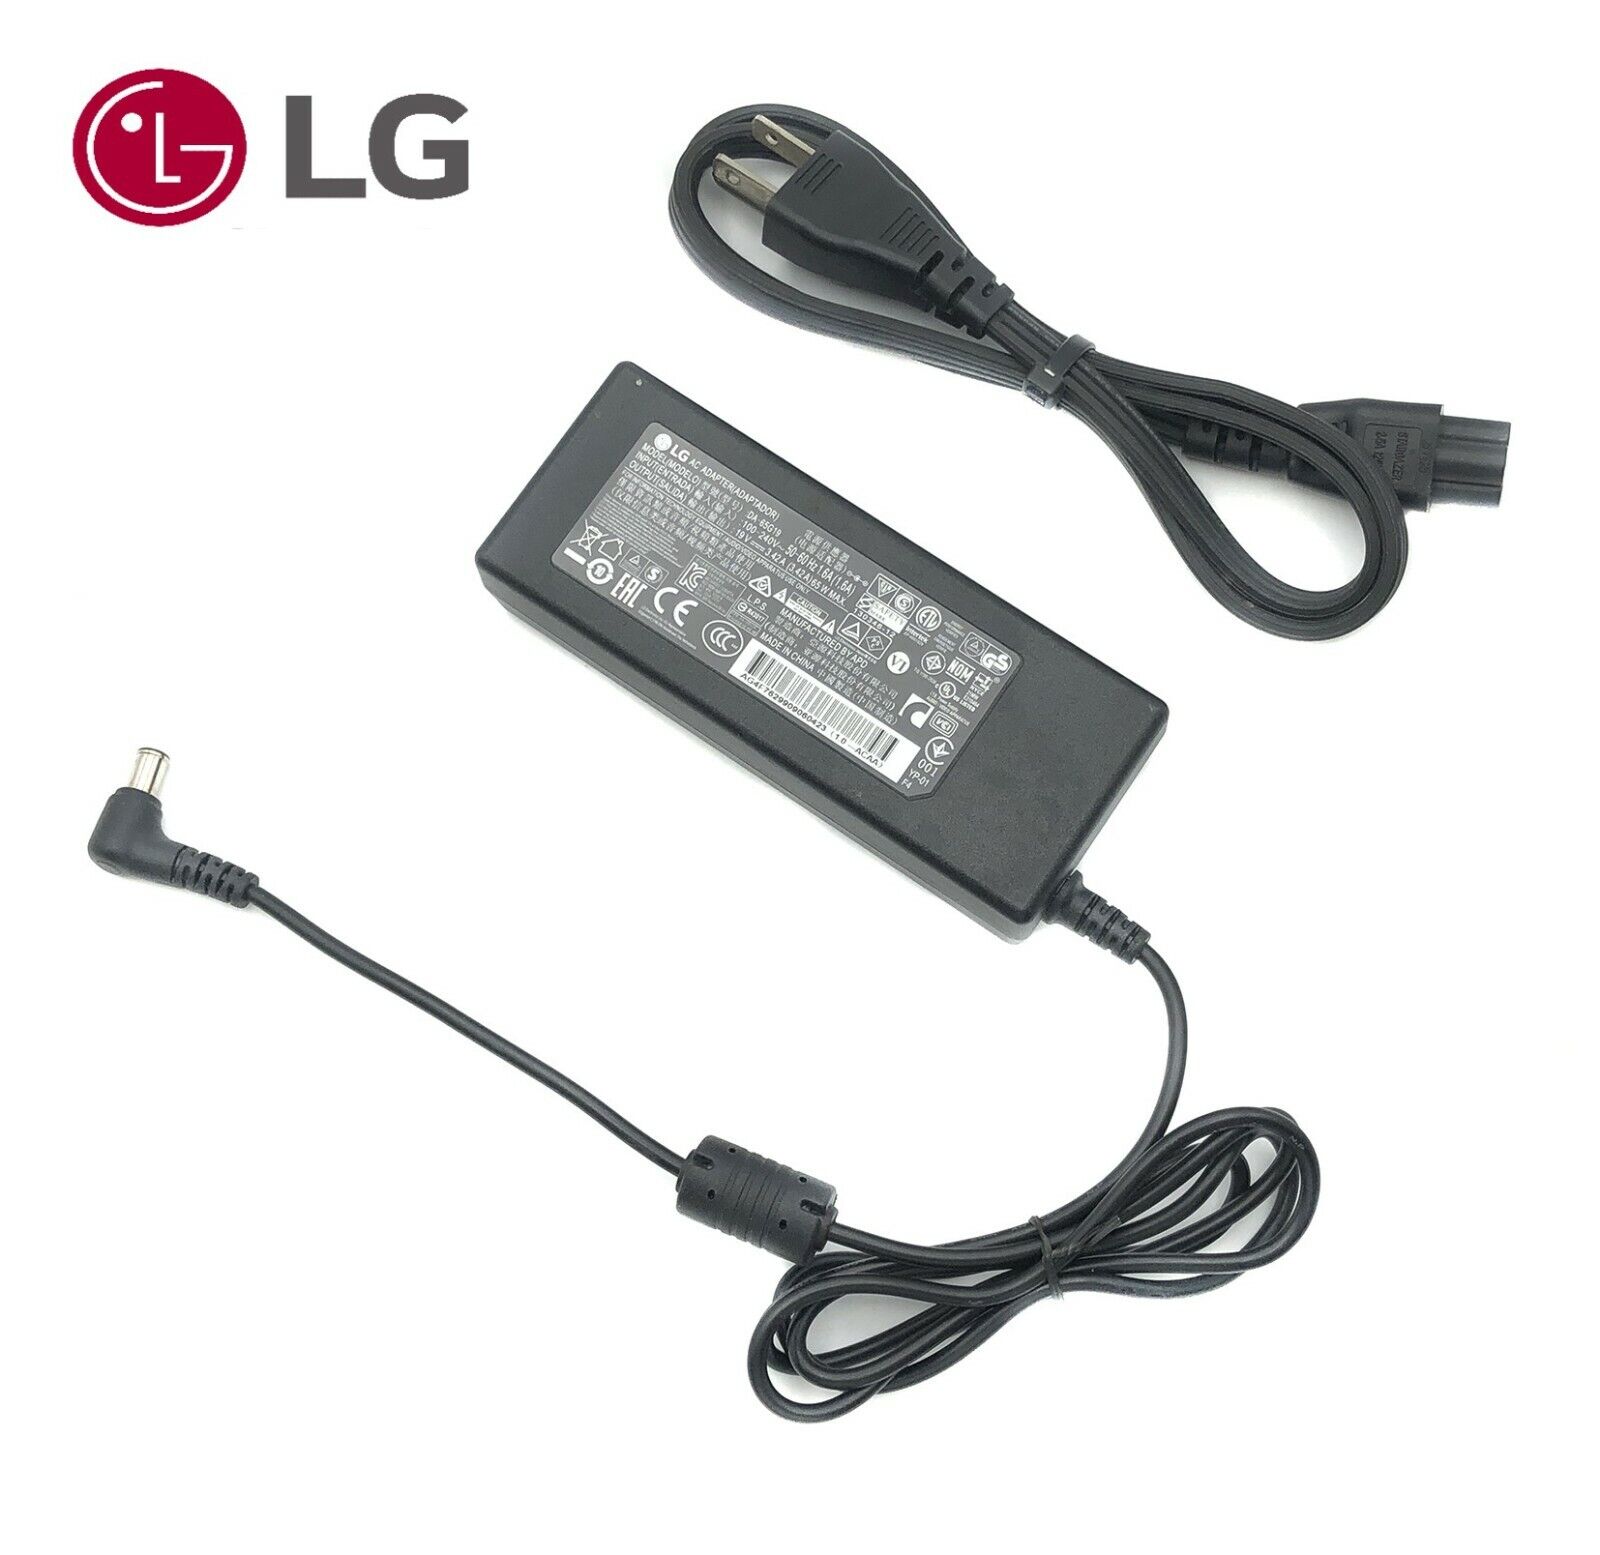 NEW Genuine LG AC Adapter For 34UC79G 34UM68-P Monitor Power Supply with Cord